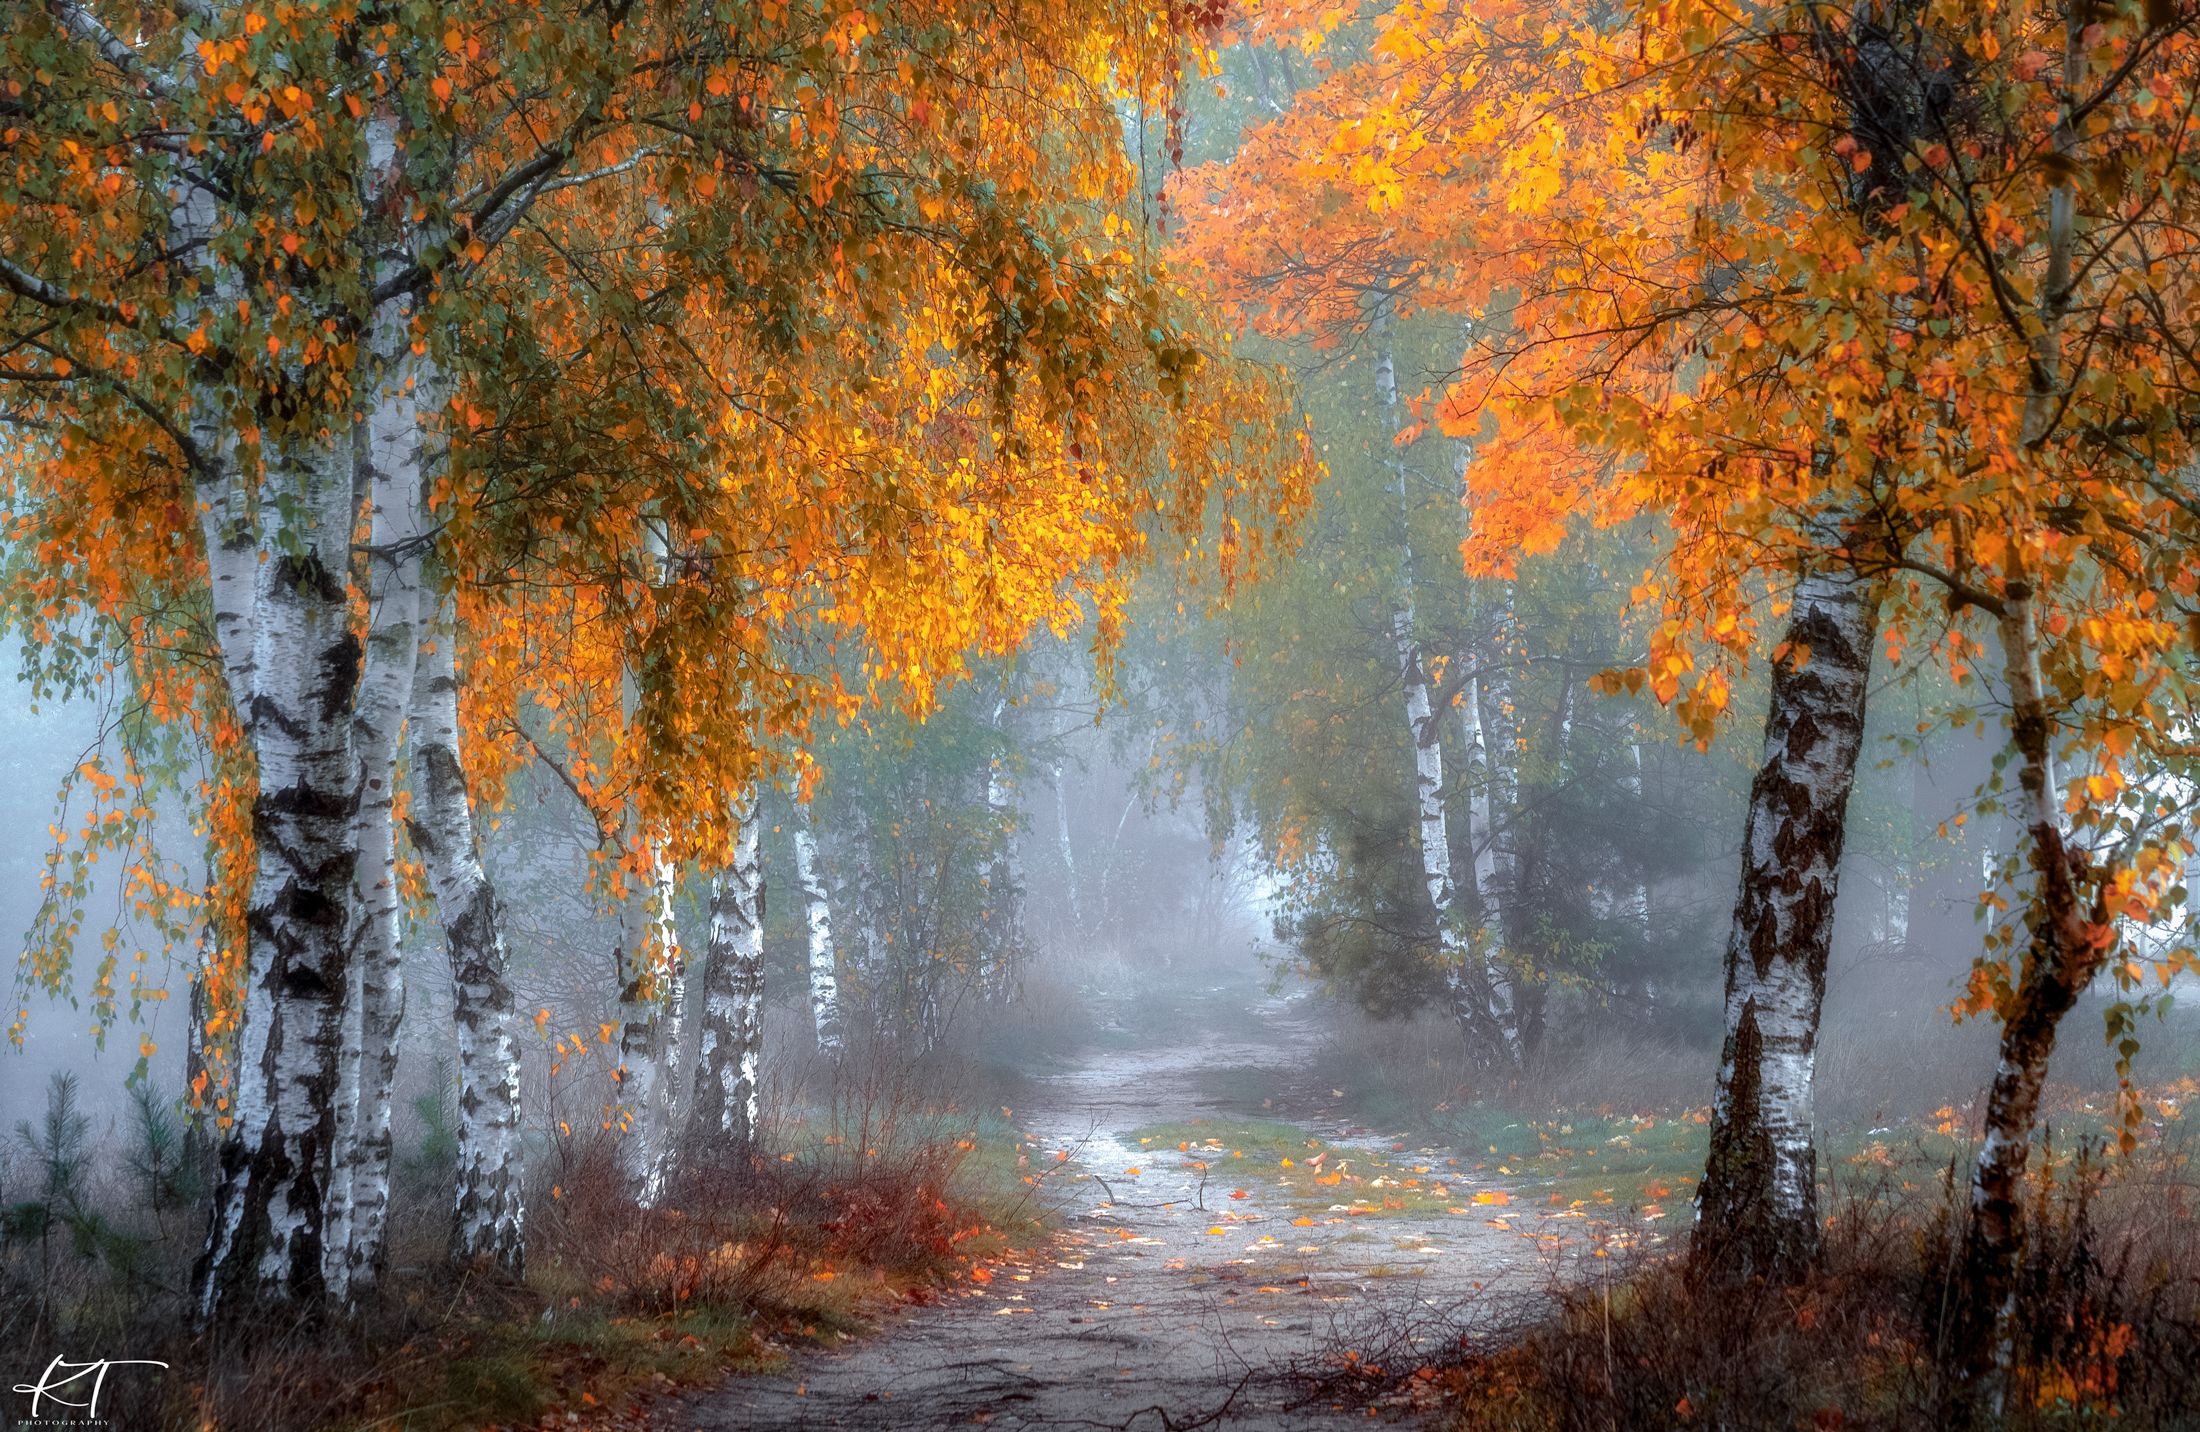 autumn  birches  alley  nature  fog  silence  trees  autumn colors  atmosphere  light  dawn  No People  Outdoors  Season  Photography, Tollas Krzysztof